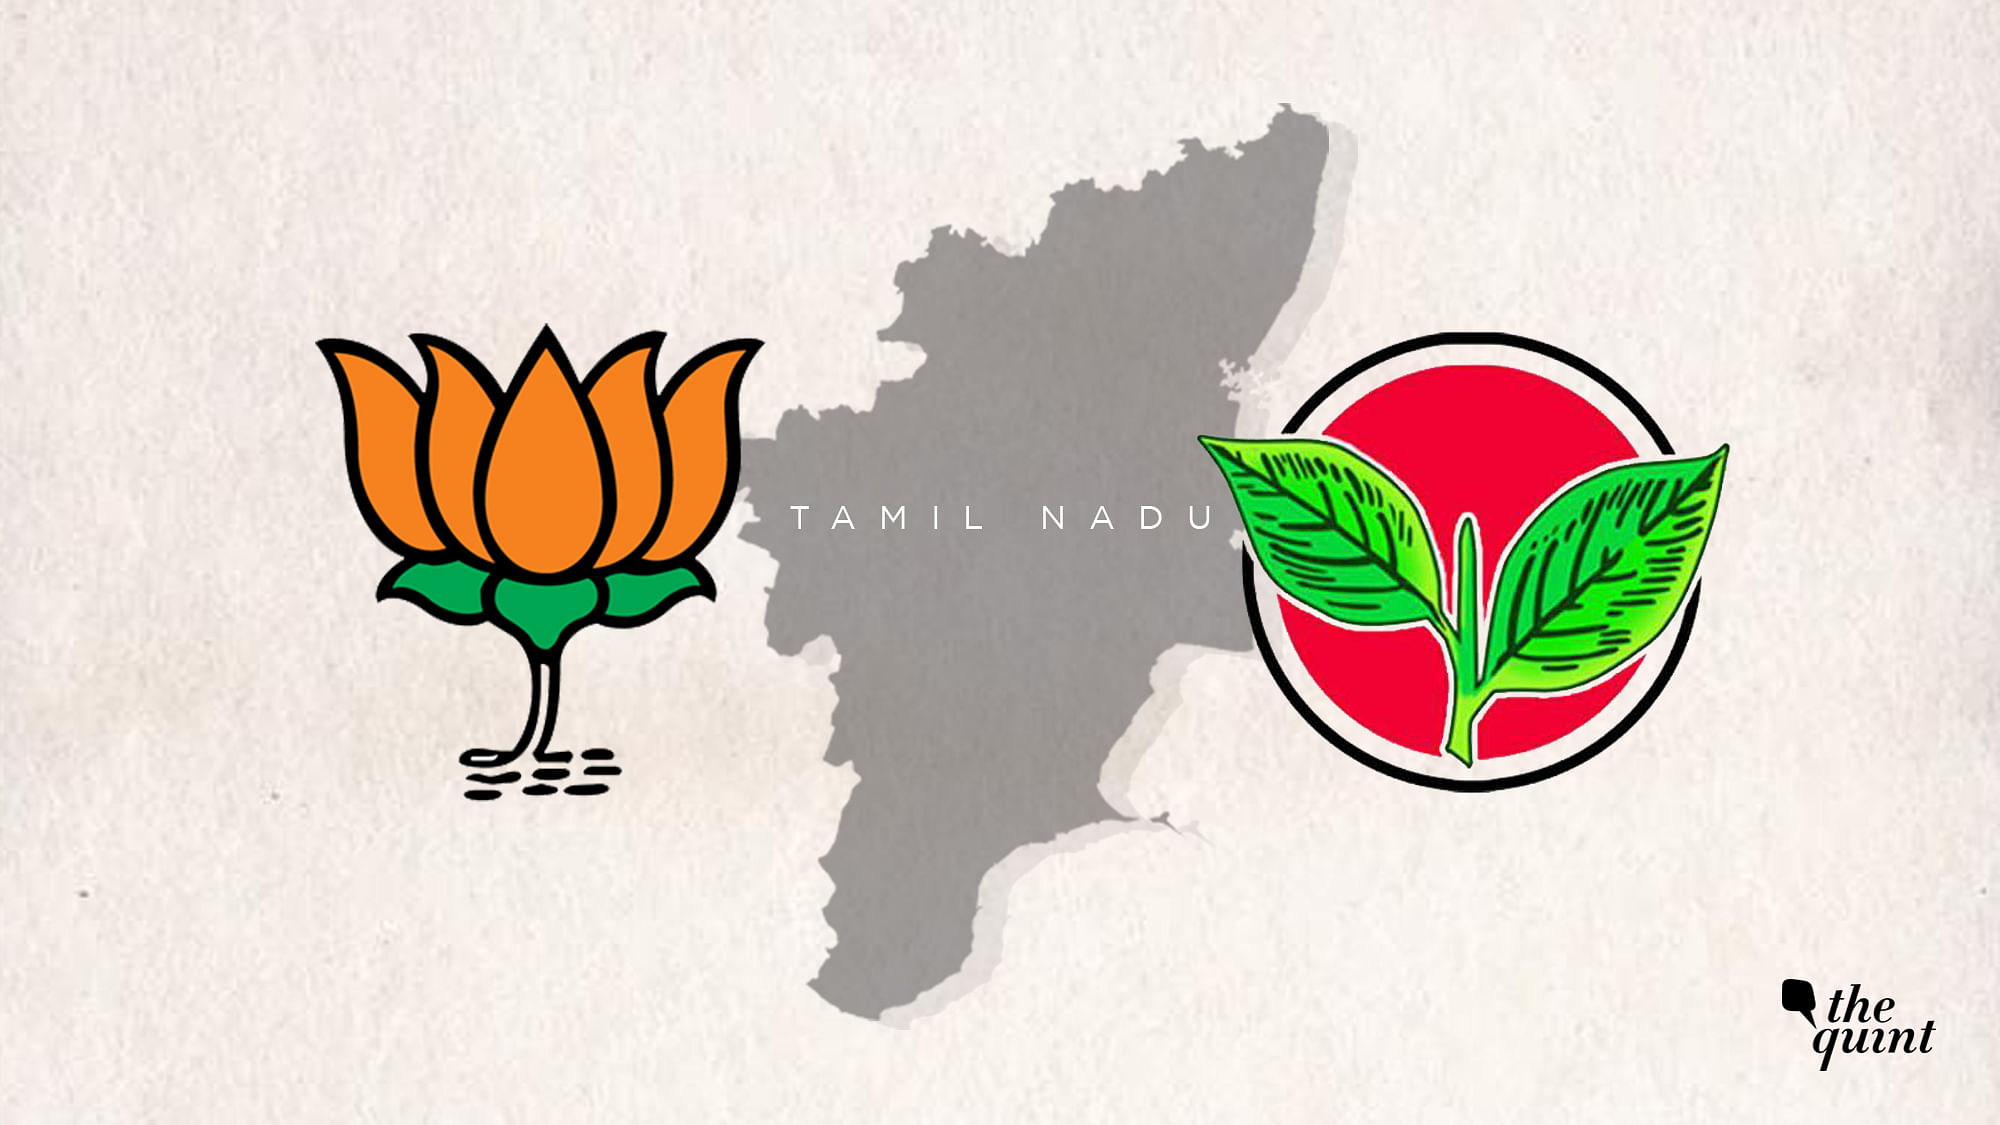 BJP’s seat-sharing arrangement with the ruling AIADMK party was finalised on Friday, 5 March.